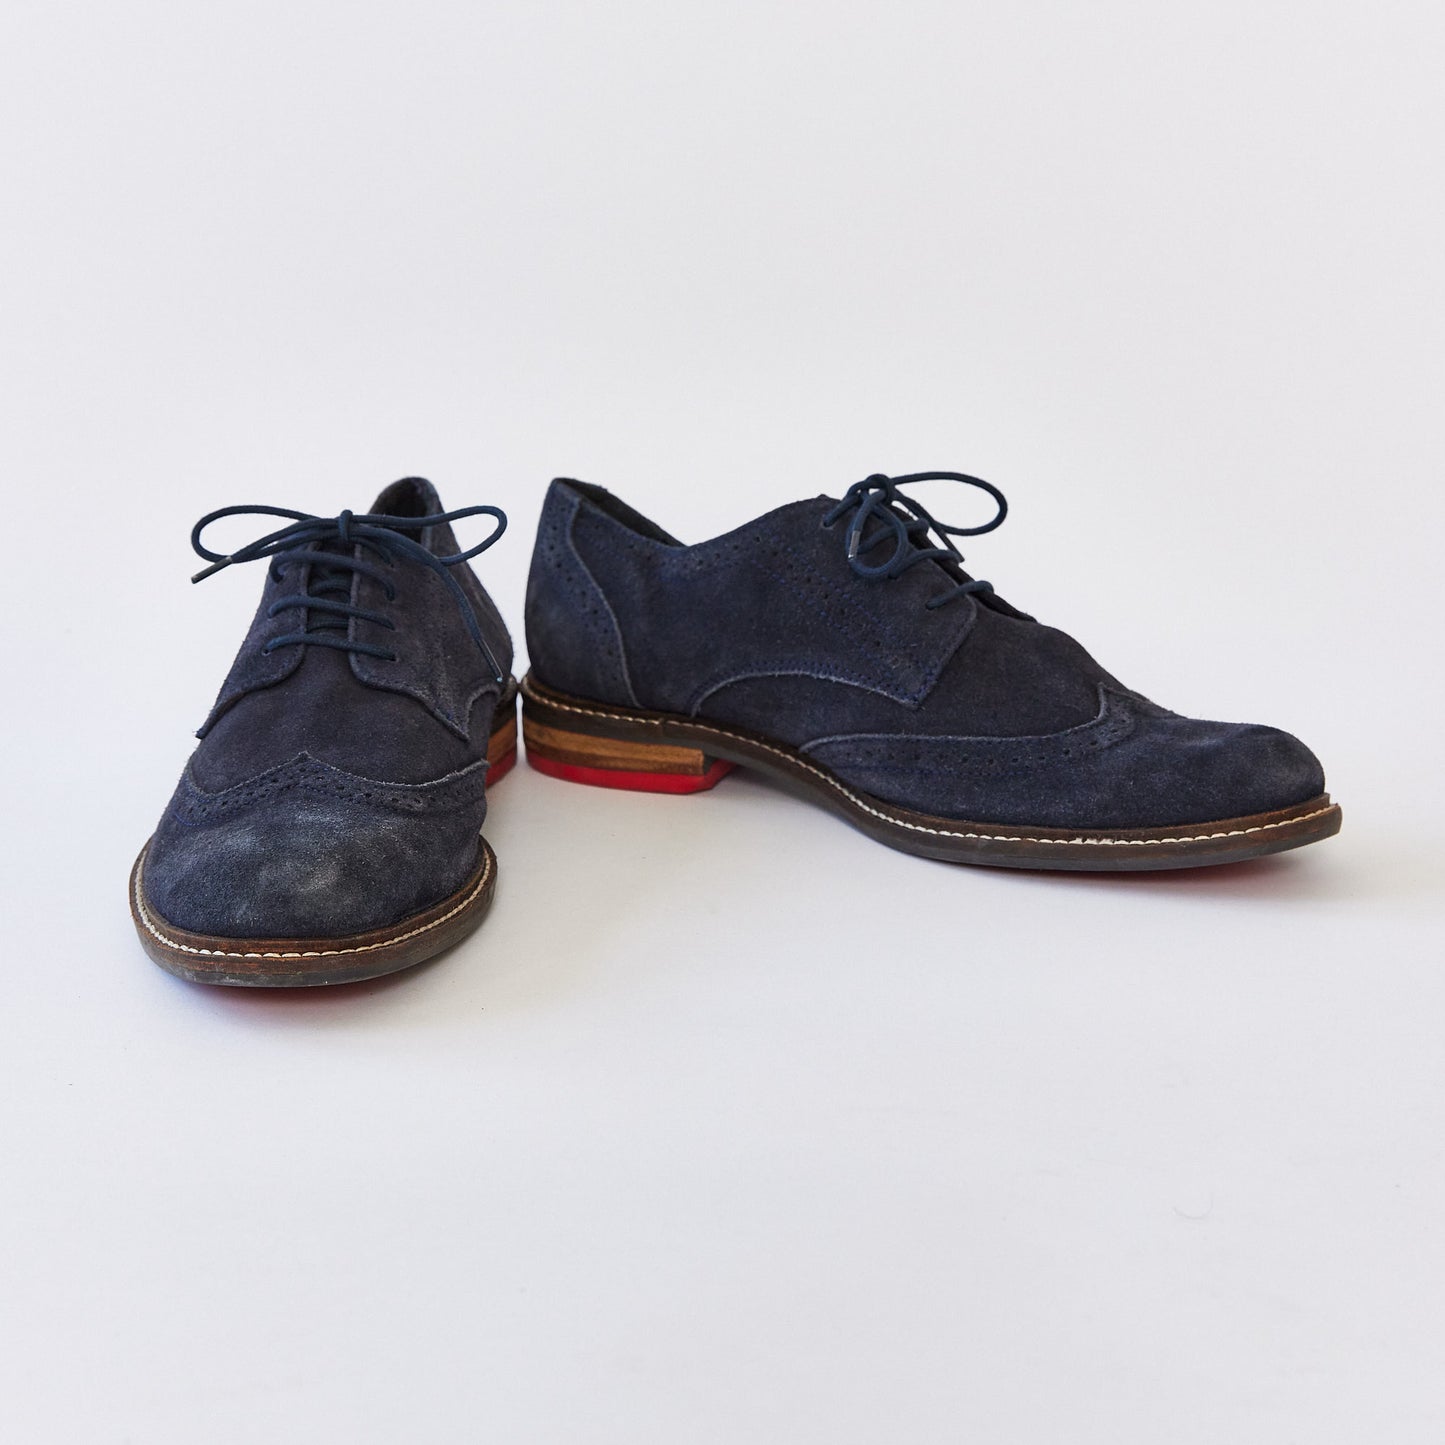 Navy suede lace up shoe size 10